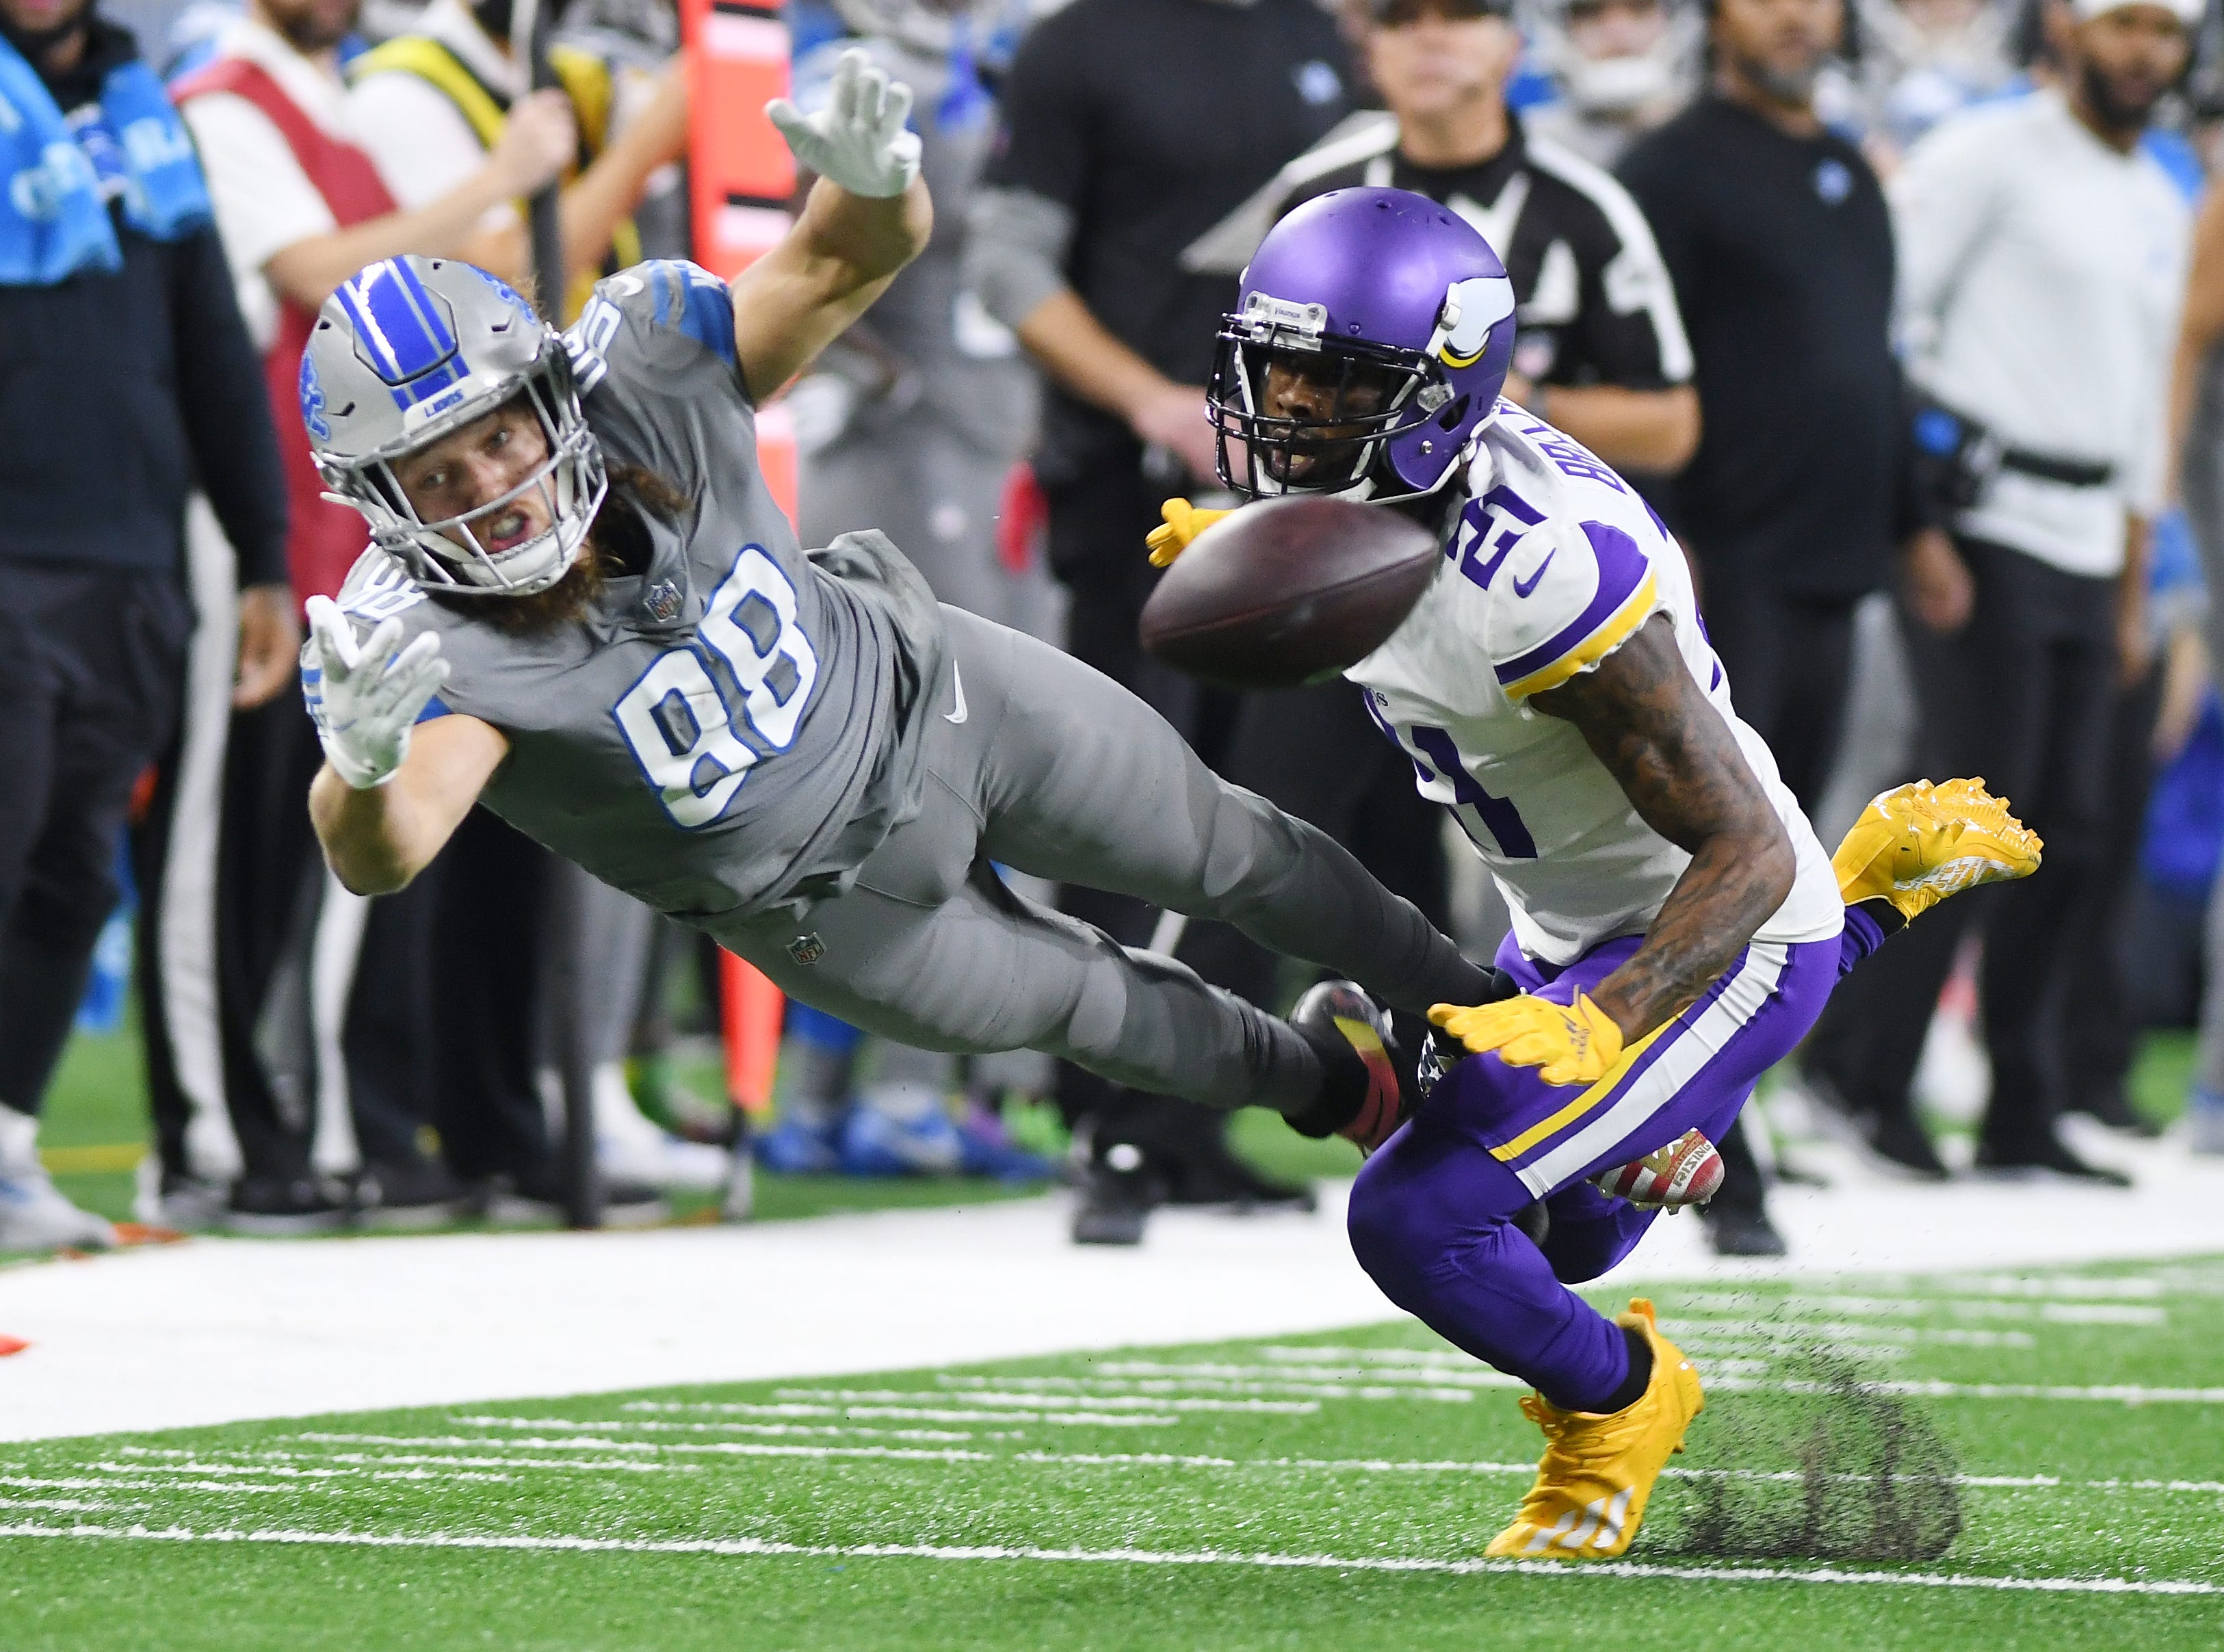 Lions tight end T.J. Hockenson gets fouled, going for a reception, by Vikings' Bashaud Breeland in the third quarter.